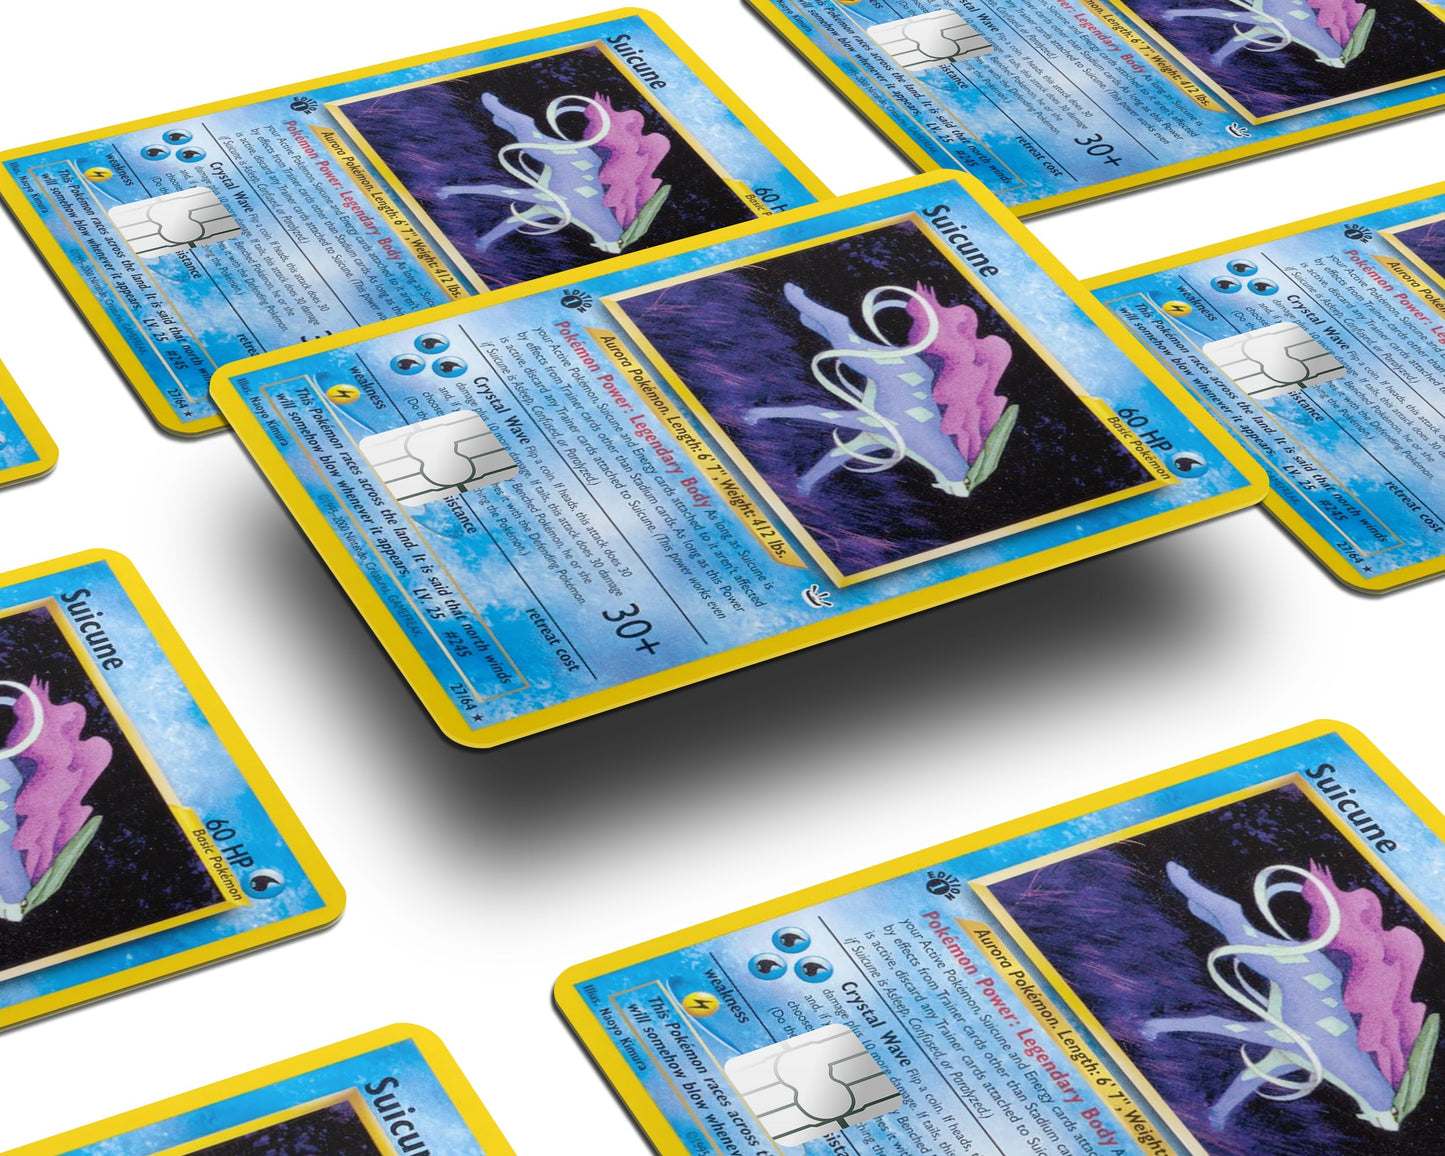 Anime Town Creations Credit Card Suicune Pokemon Card Half Skins - Anime Pokemon Credit Card Skin